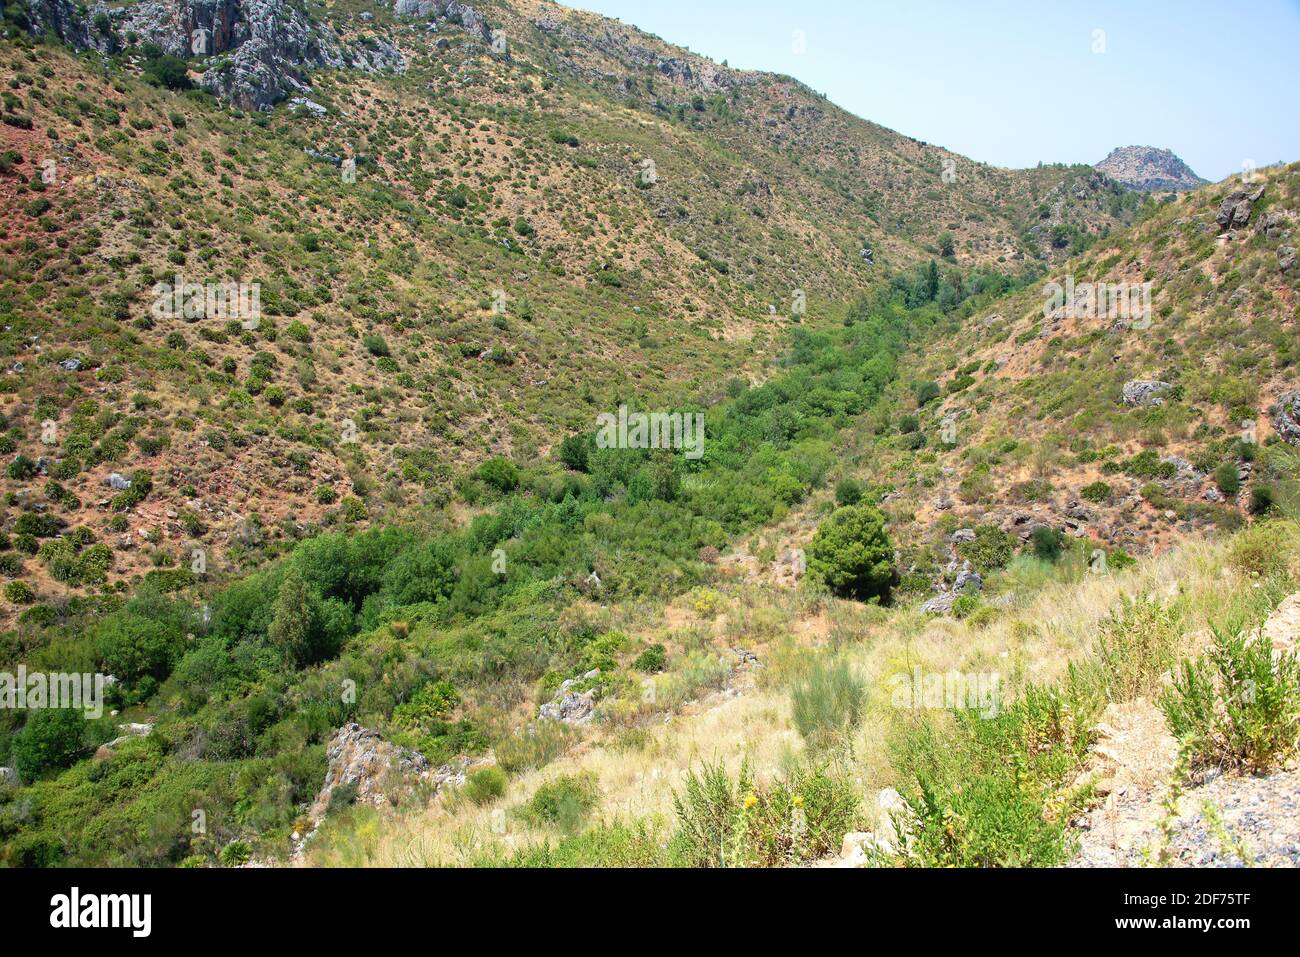 Gallery forest is a vegetal formation linked to a existence of a watercourse. This photo was taken in Malaga province, Andalucia, Spain. Stock Photo